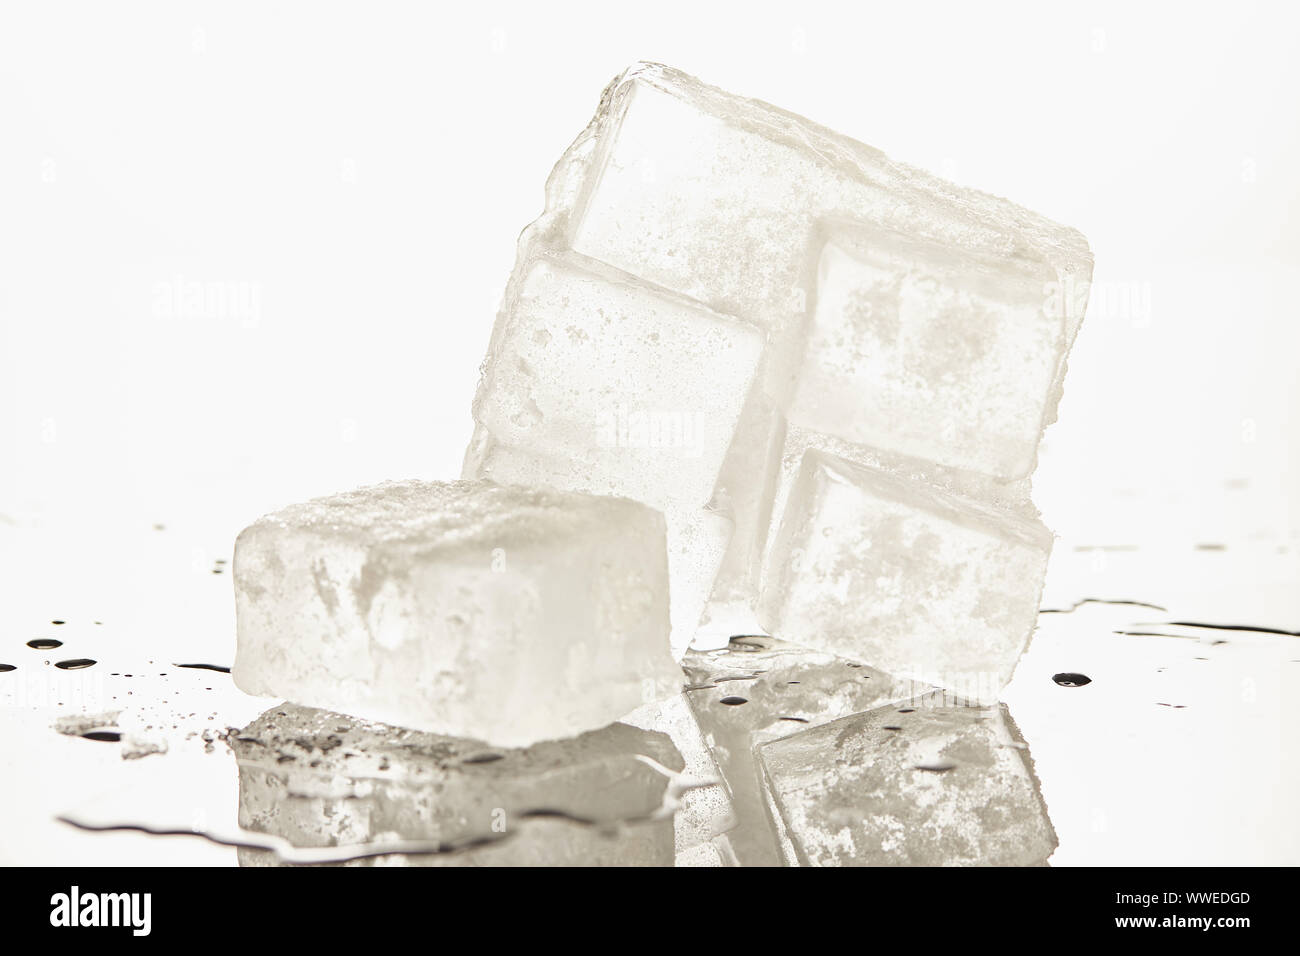 A Large Rectangle Of Melting Clear Ice On White Background With A